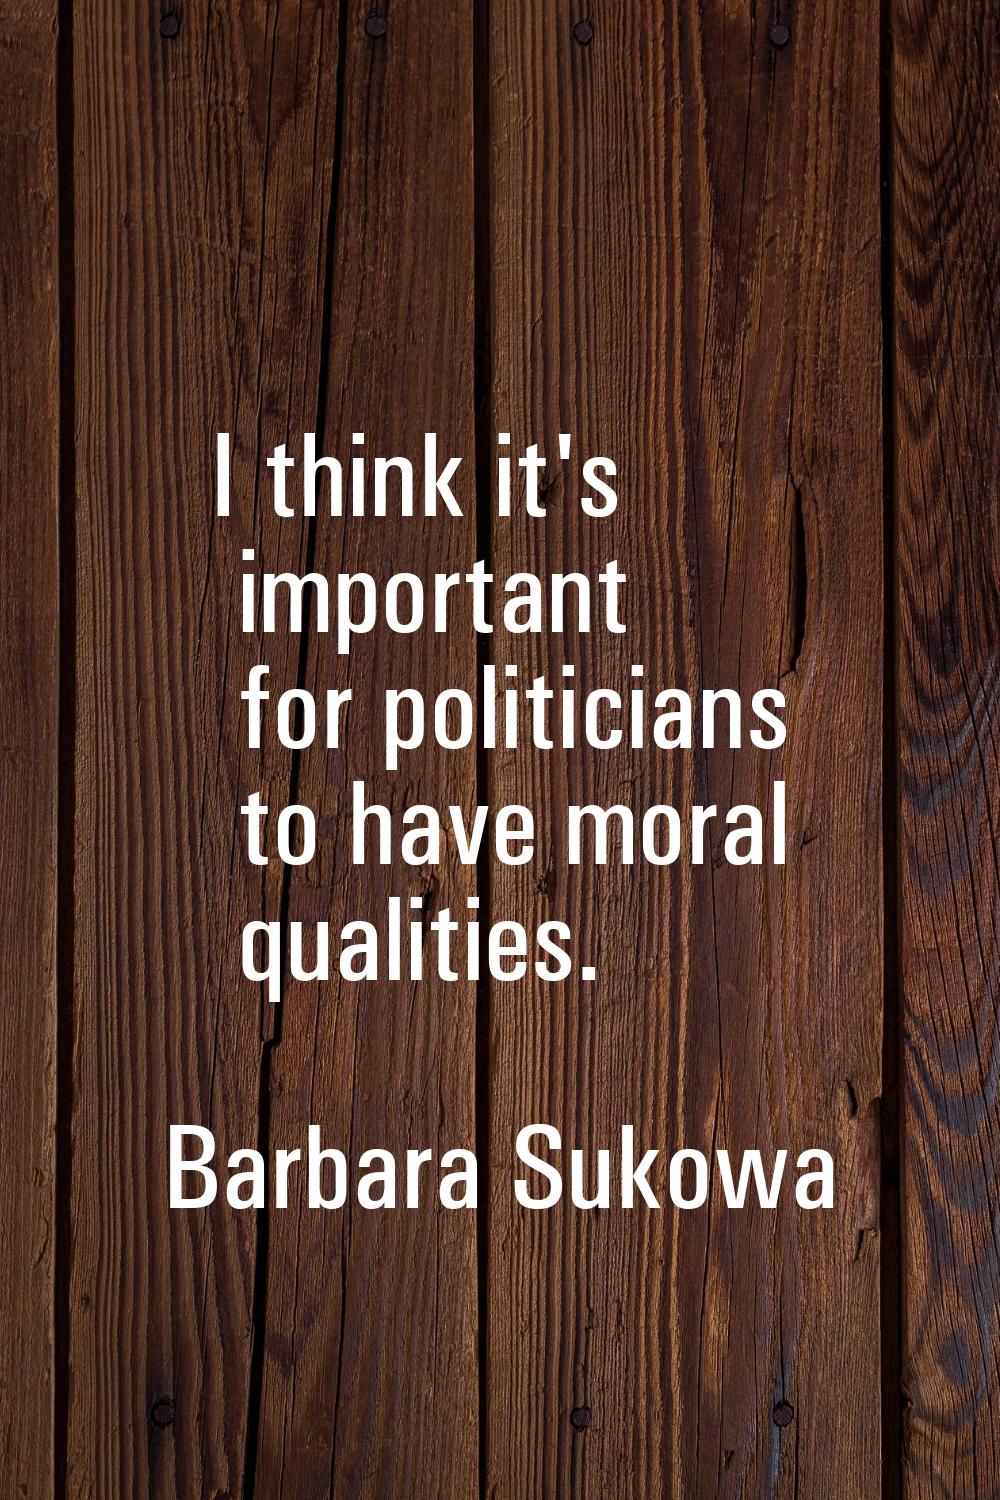 I think it's important for politicians to have moral qualities.